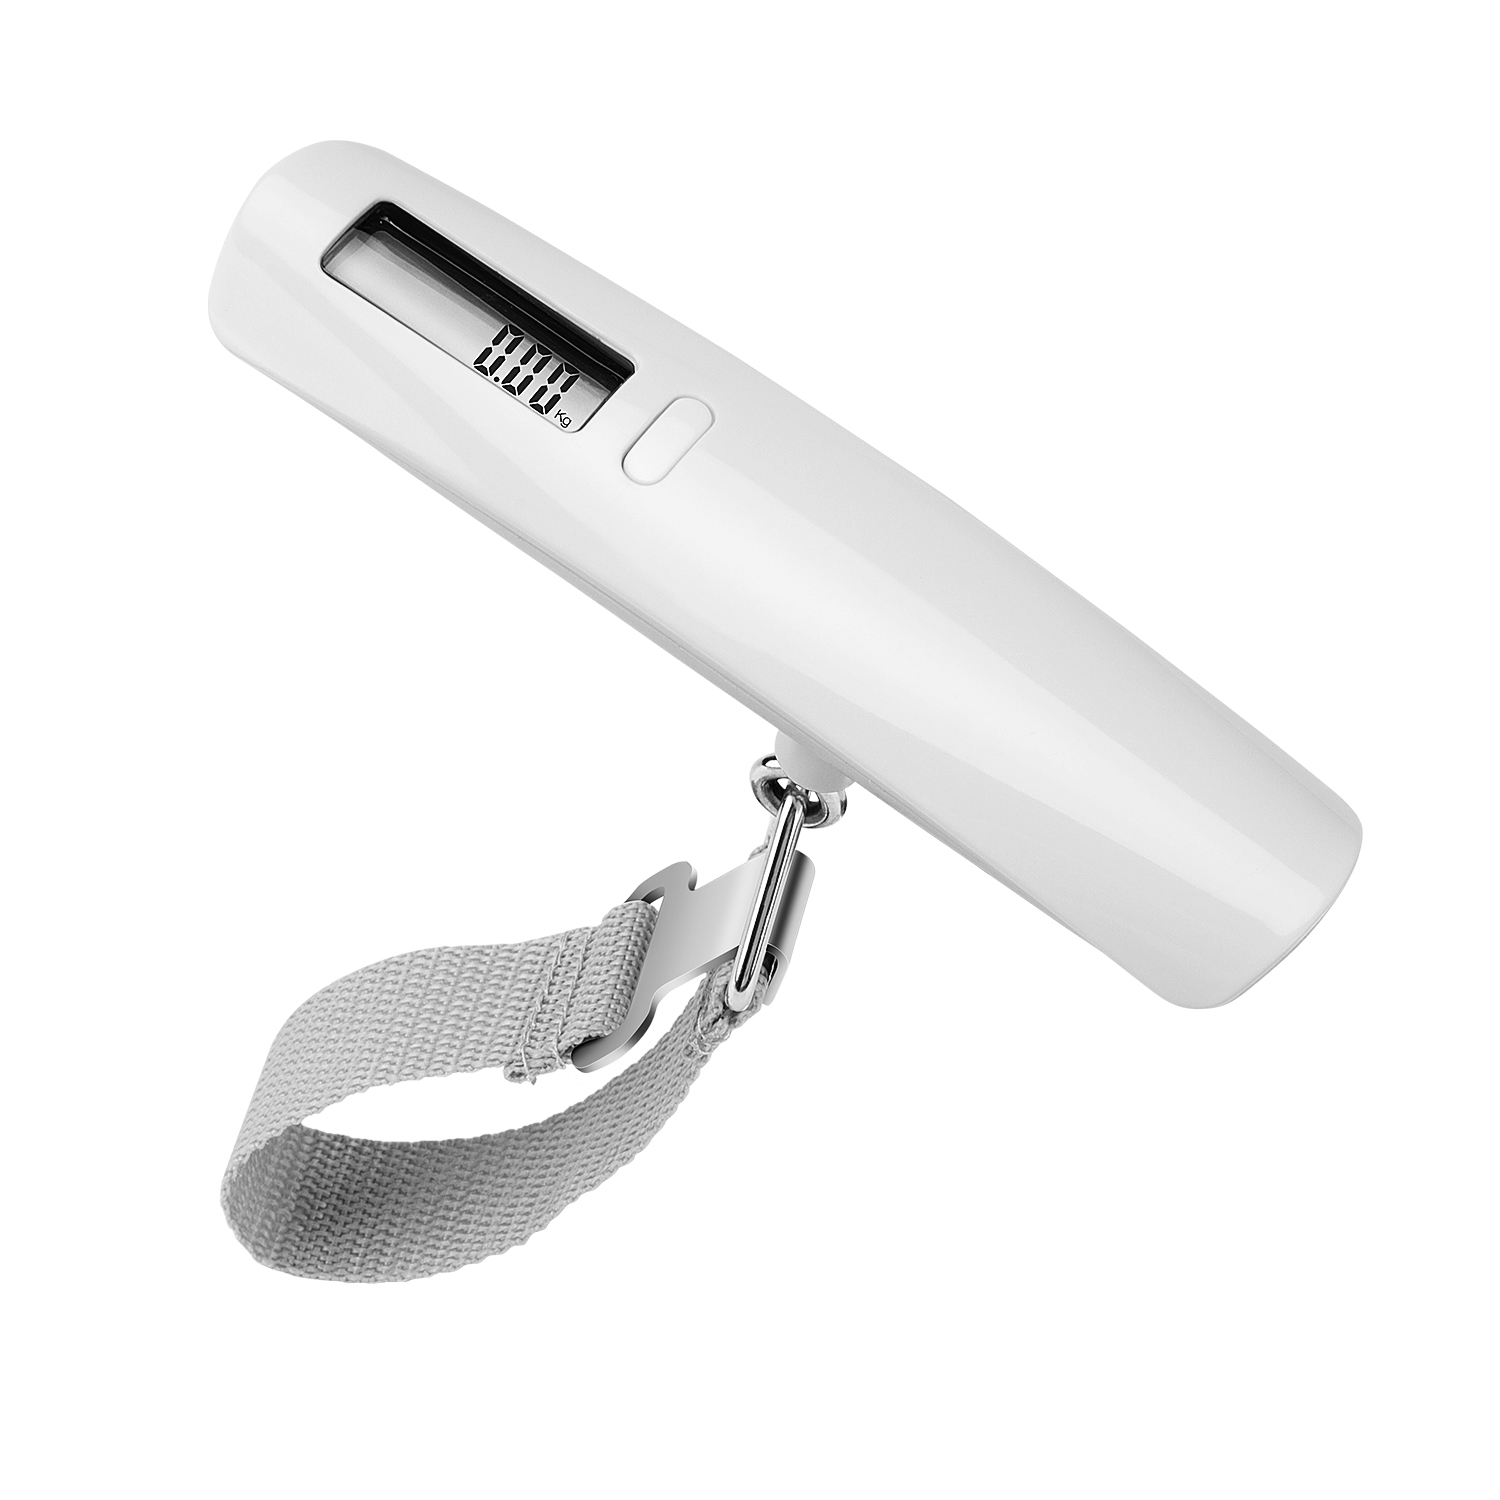 SAINTBOND Travel Case Hand Held Digital Weighing Luggage Scale Hanging Scale Luggage 50kg/10g